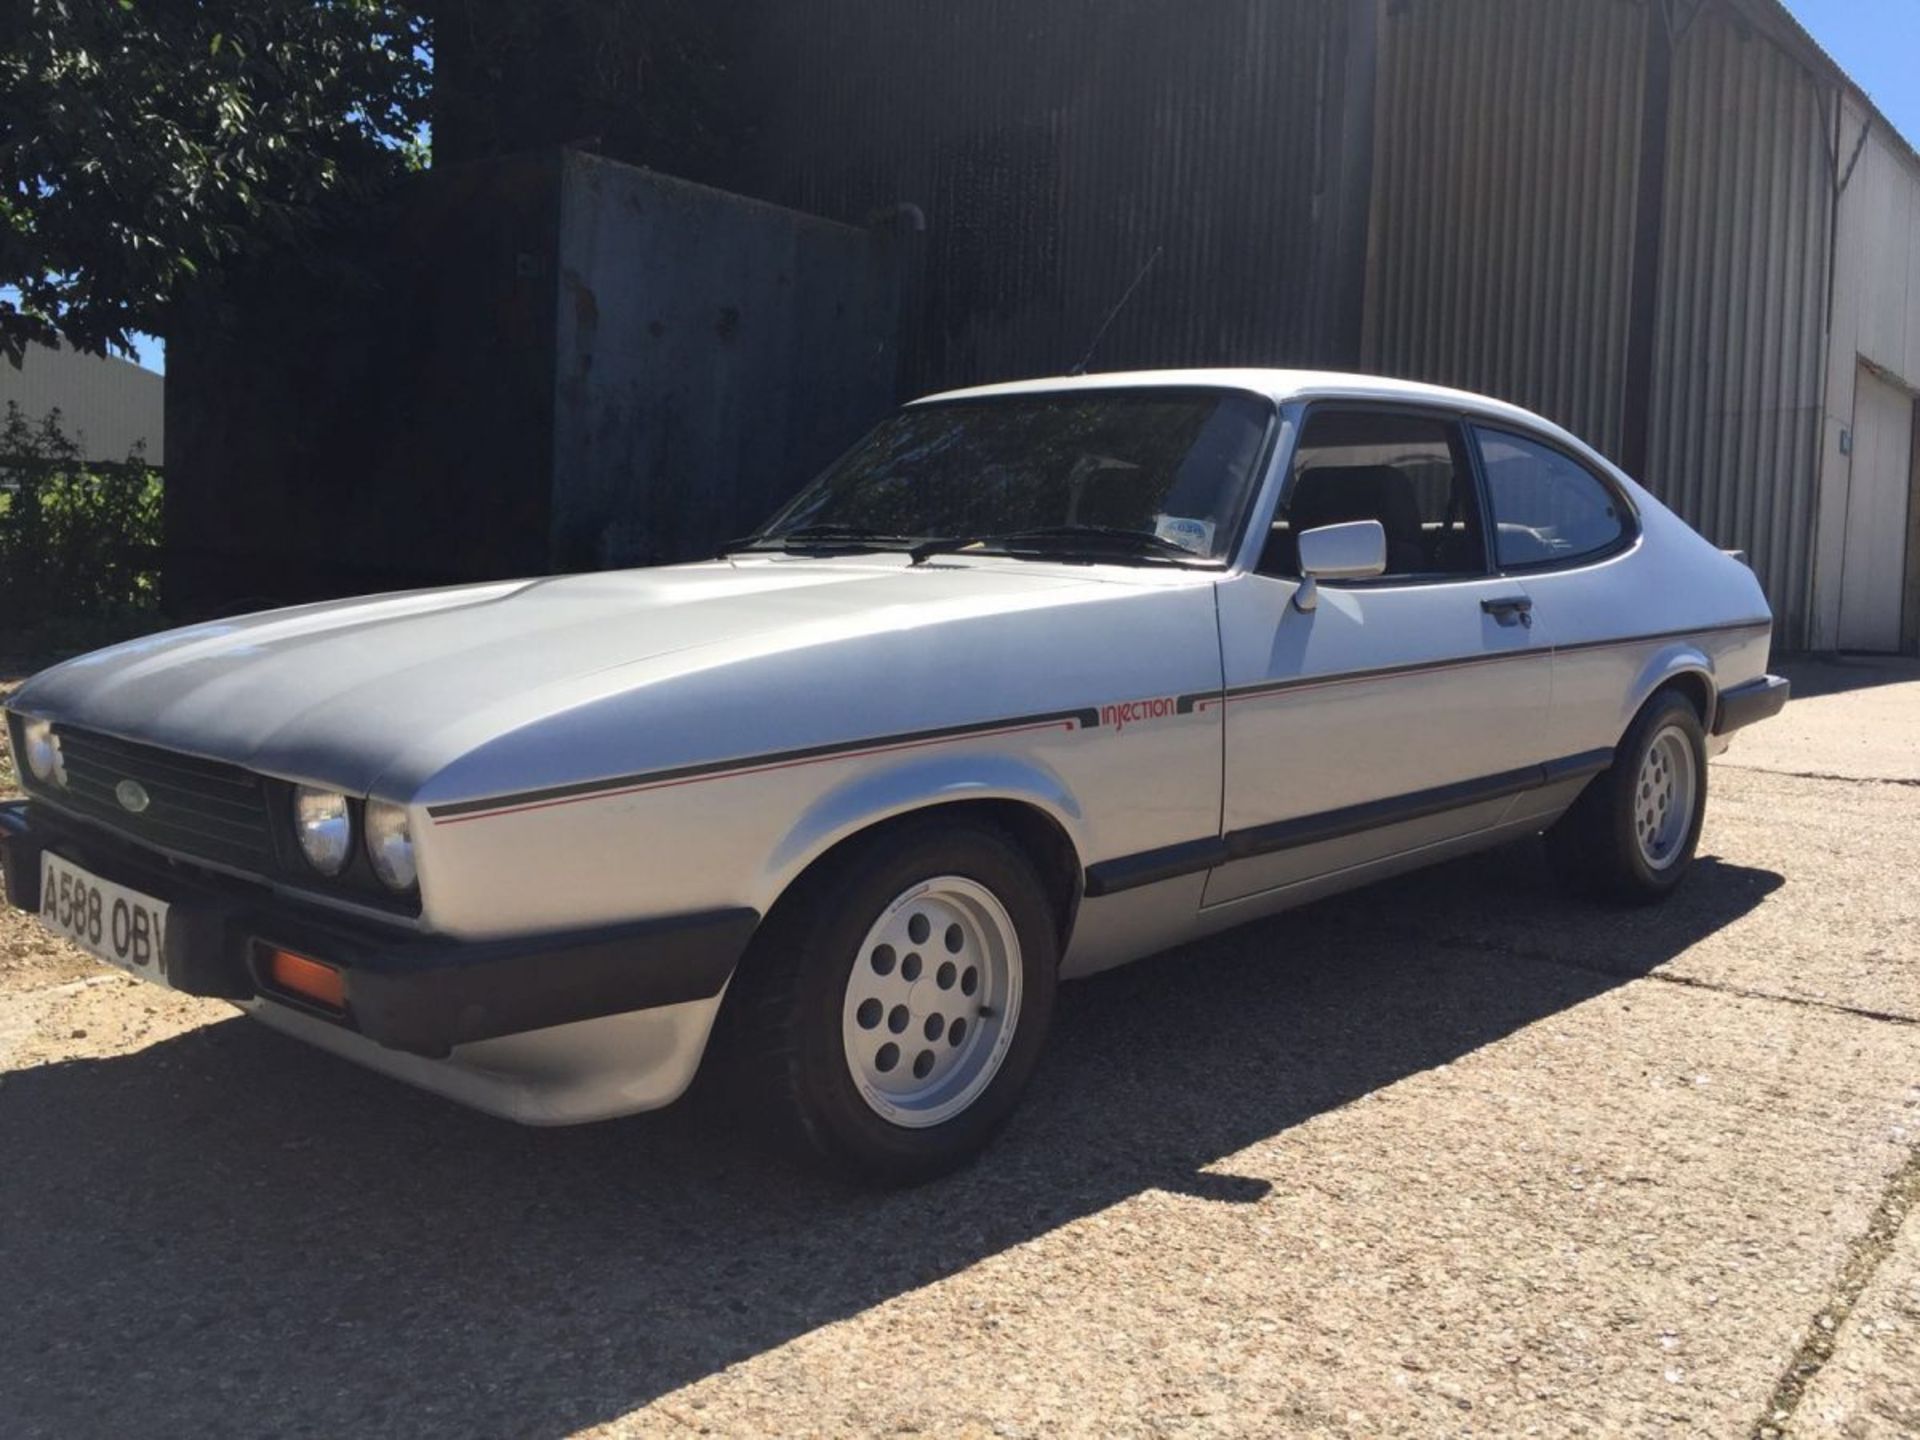 WITHDRAWN - Ford Capri 2.8 Injection 1984 - Needing no introducing is this very clean, two former